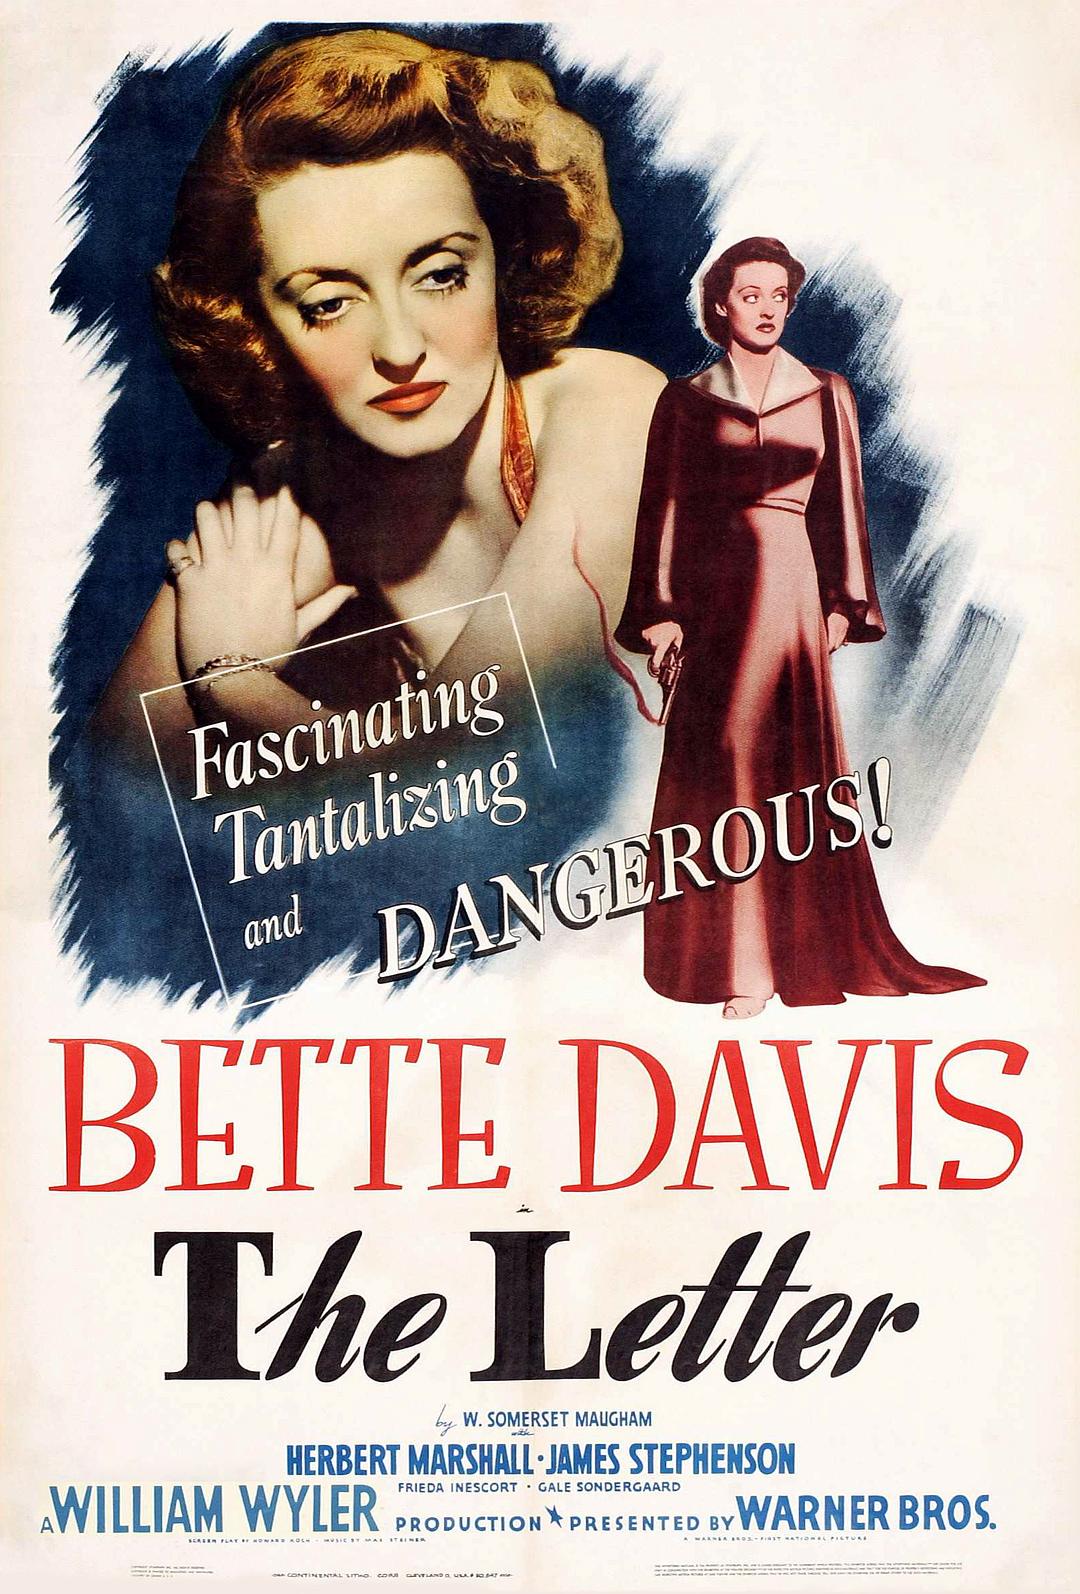  The.Letter.1940.1080p.BluRay.x264-SiNNERS 9.85GB-1.png